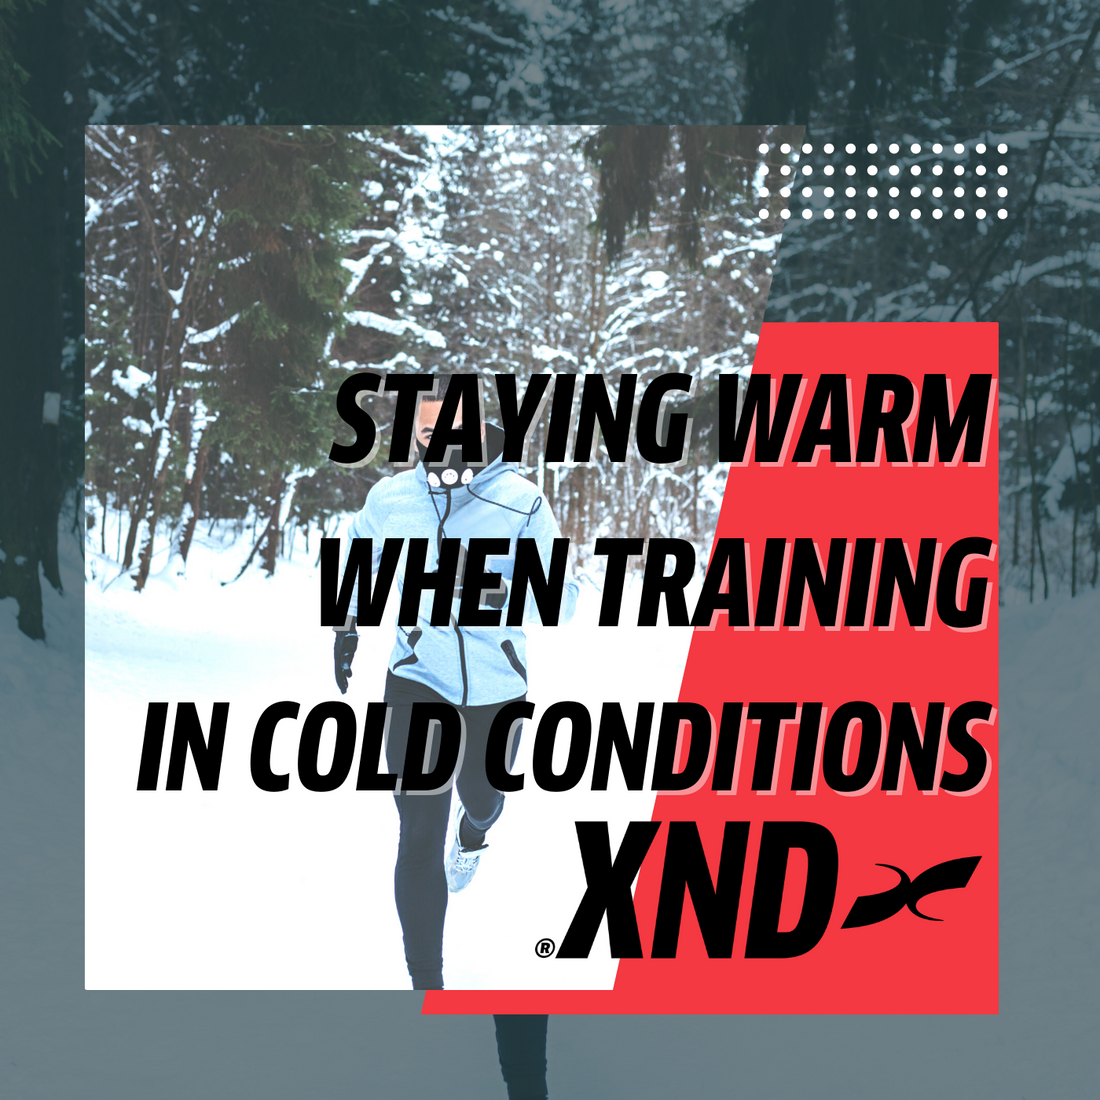 The Importance of Staying Warm when Training/Racing in Cold Conditions